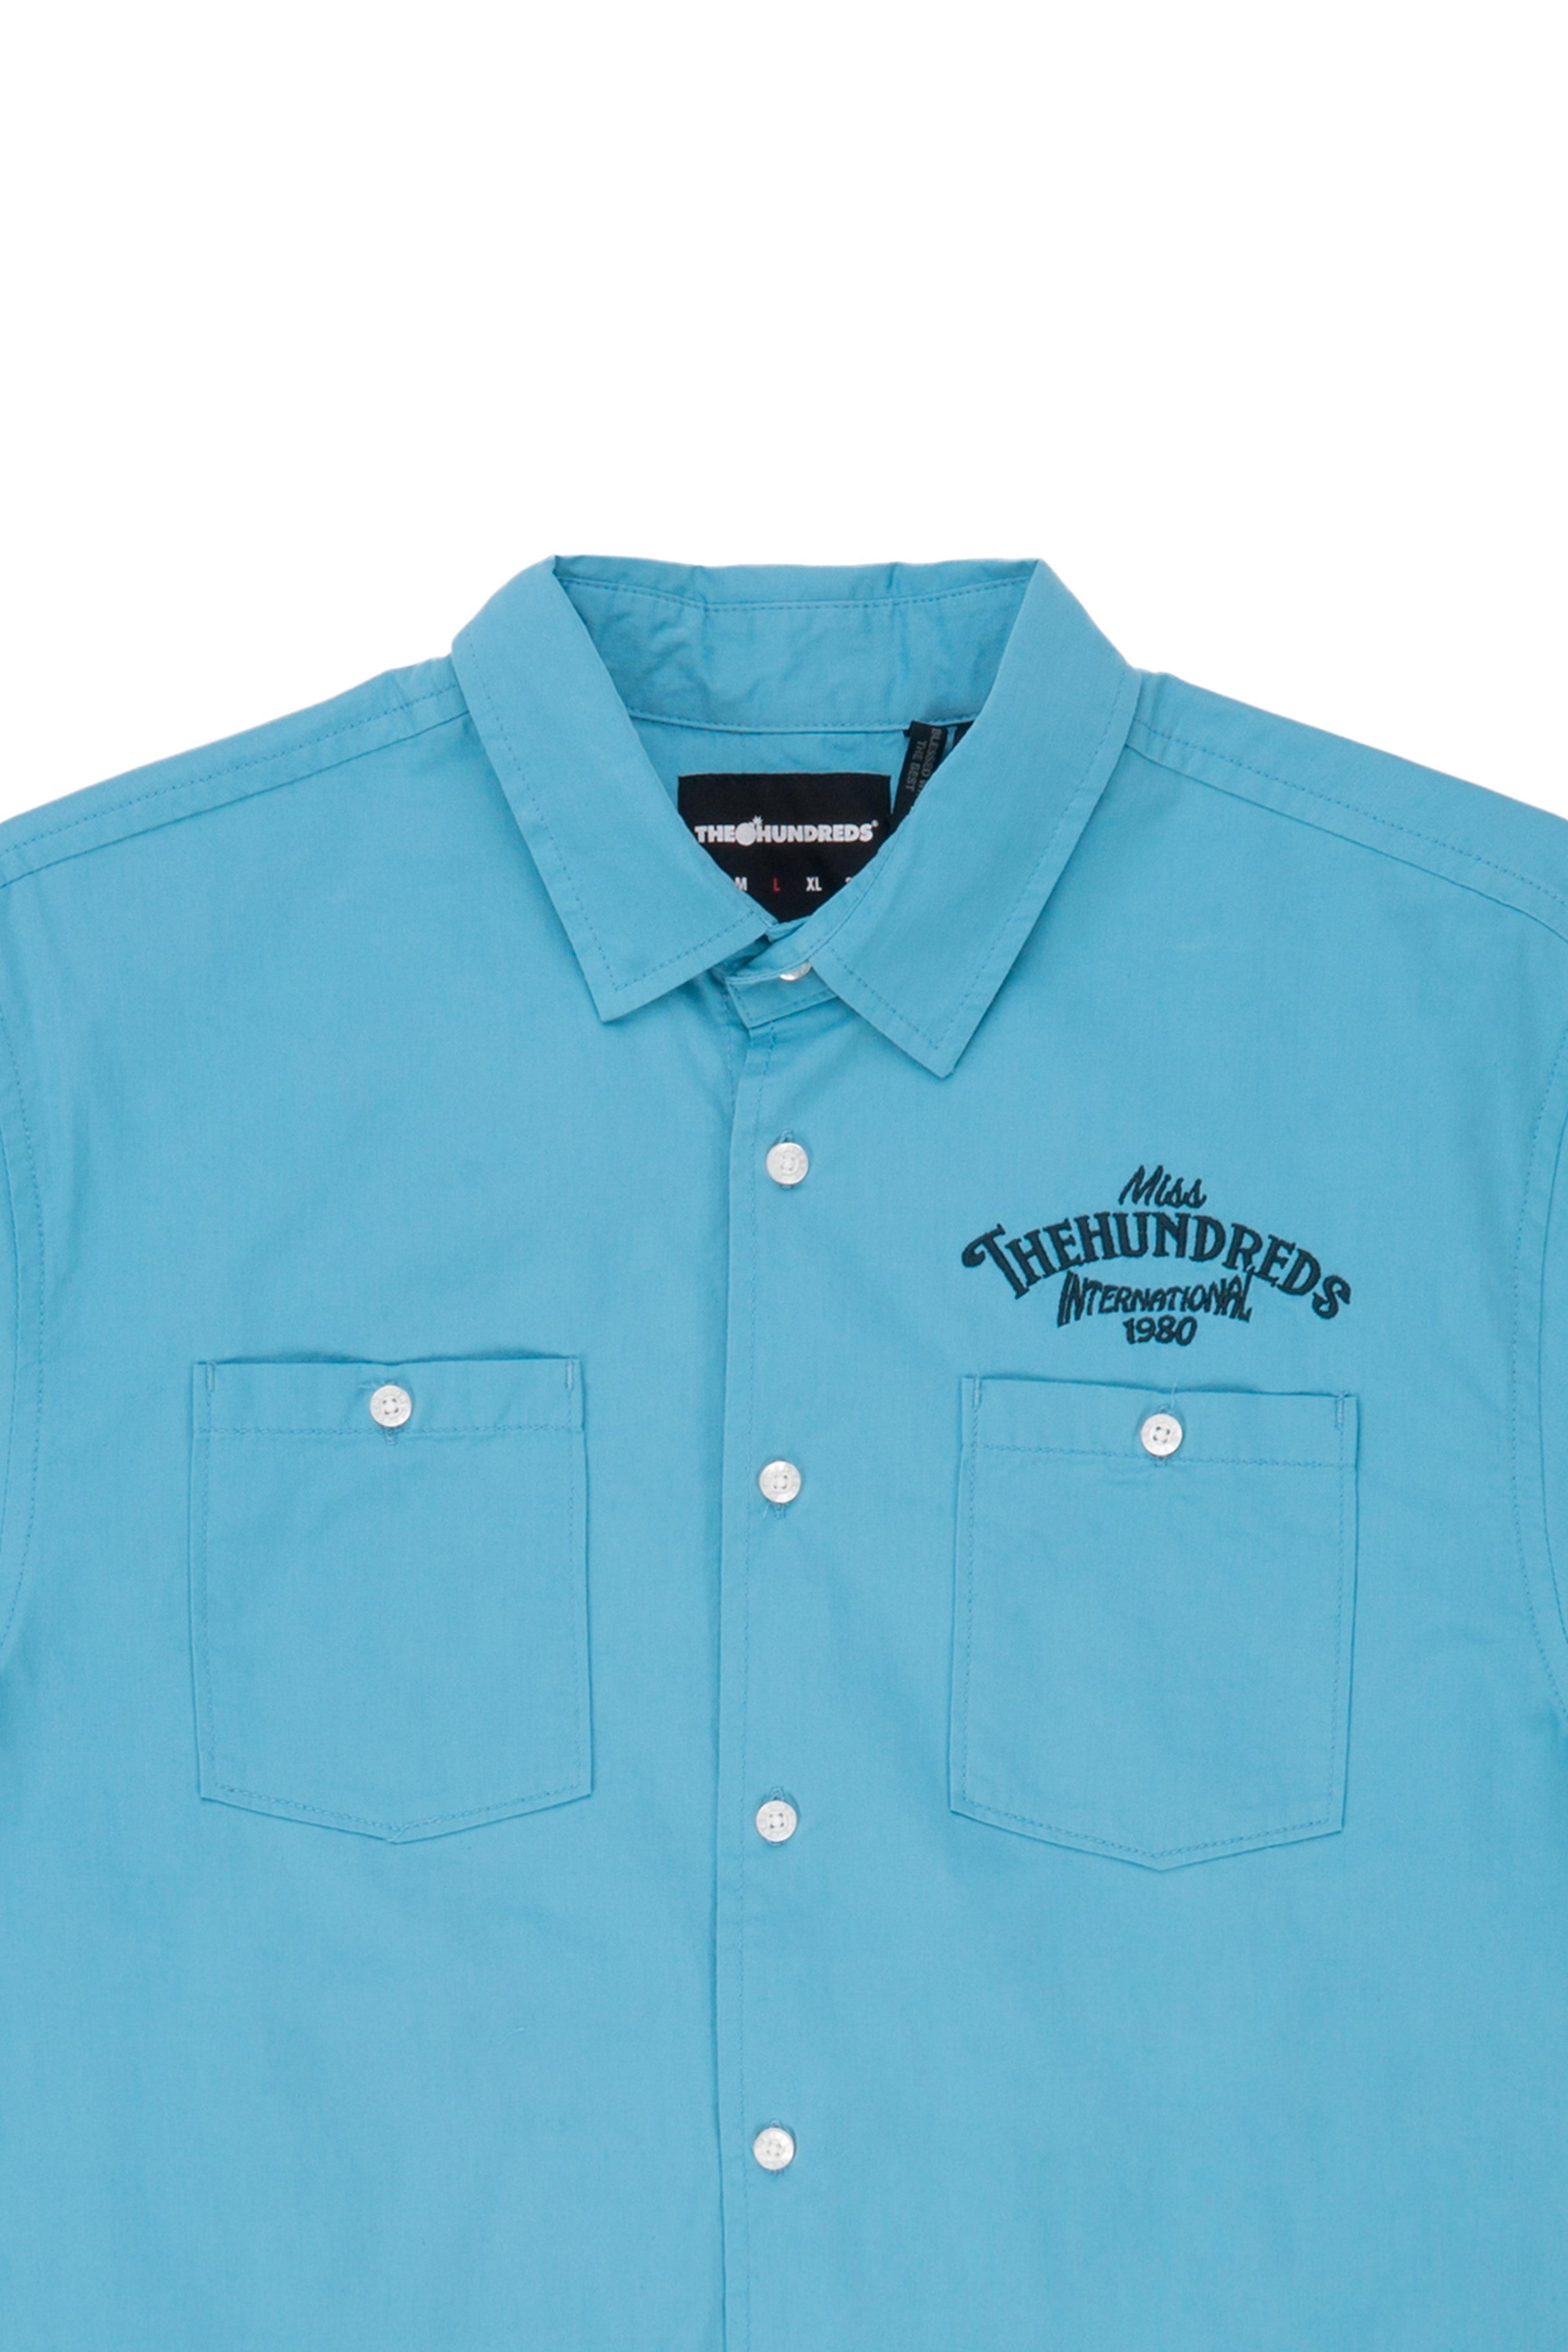 Alternate View 9 of International S/S Button-Up